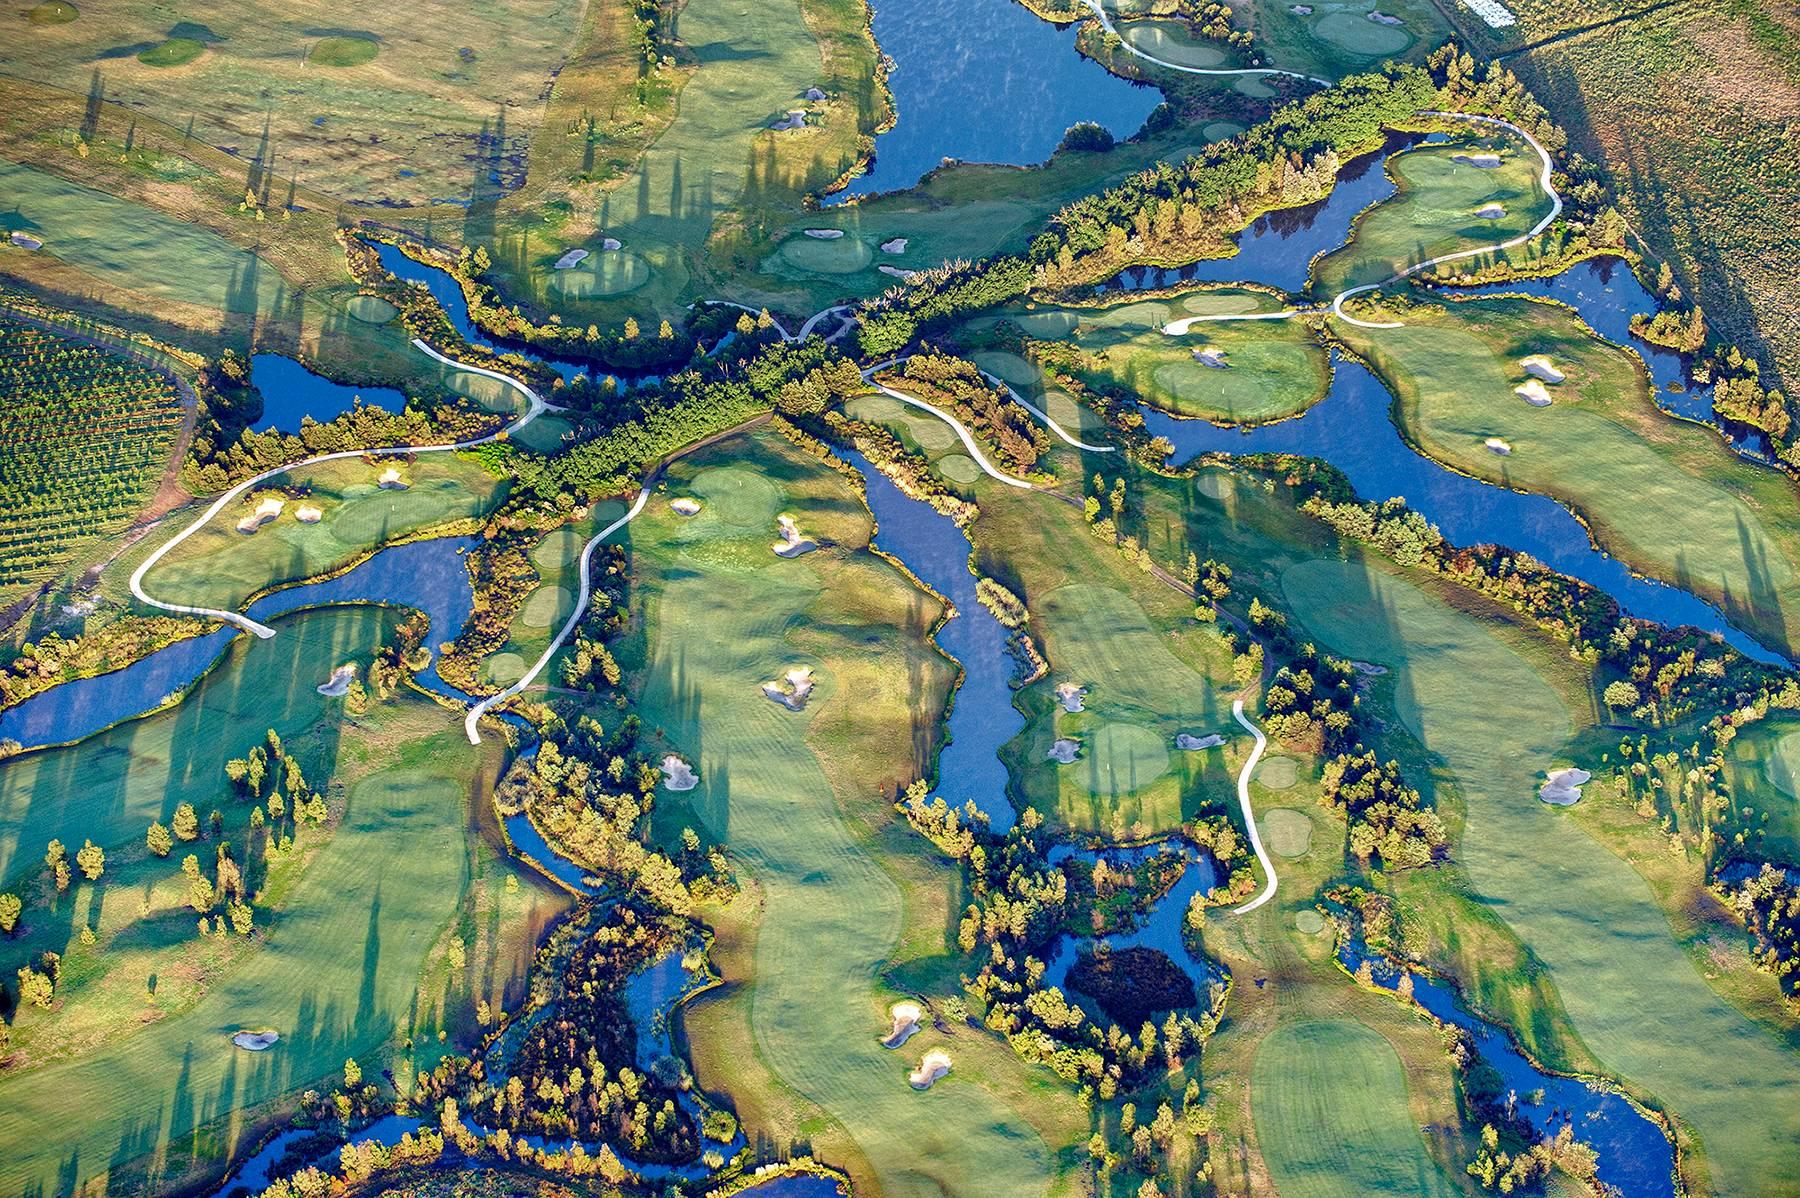 Zoe Wetherall Abstract Photograph - Golf Course, dye sublimated print on aluminum 